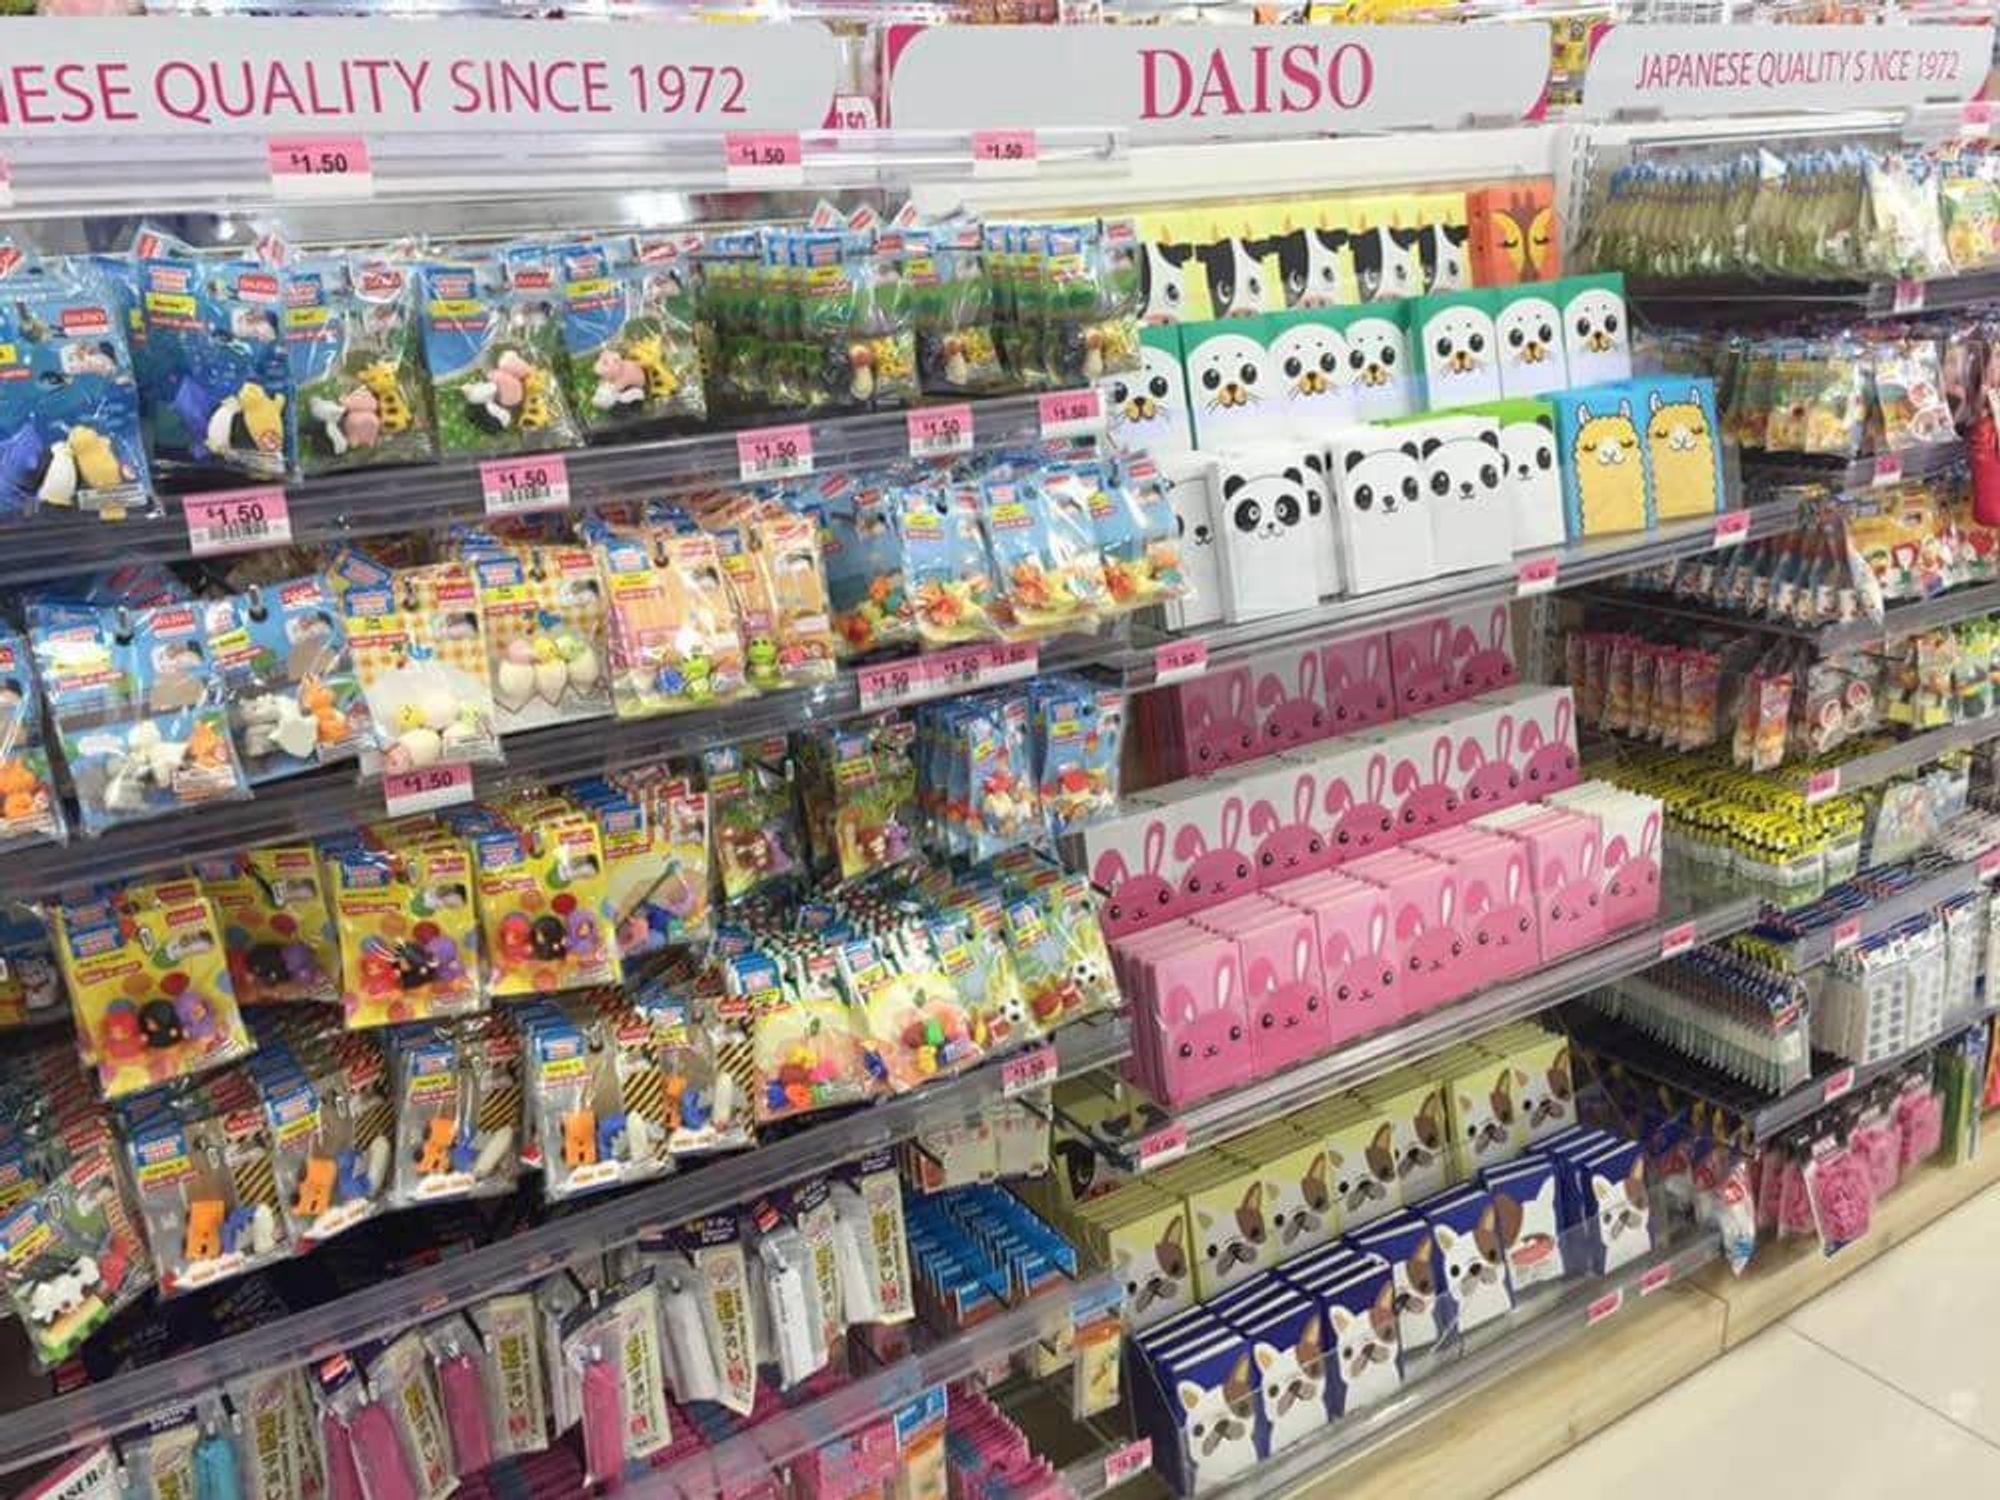 Daiso in HARAJUKU!🍡🇯🇵🌸 shop with me + haul! 